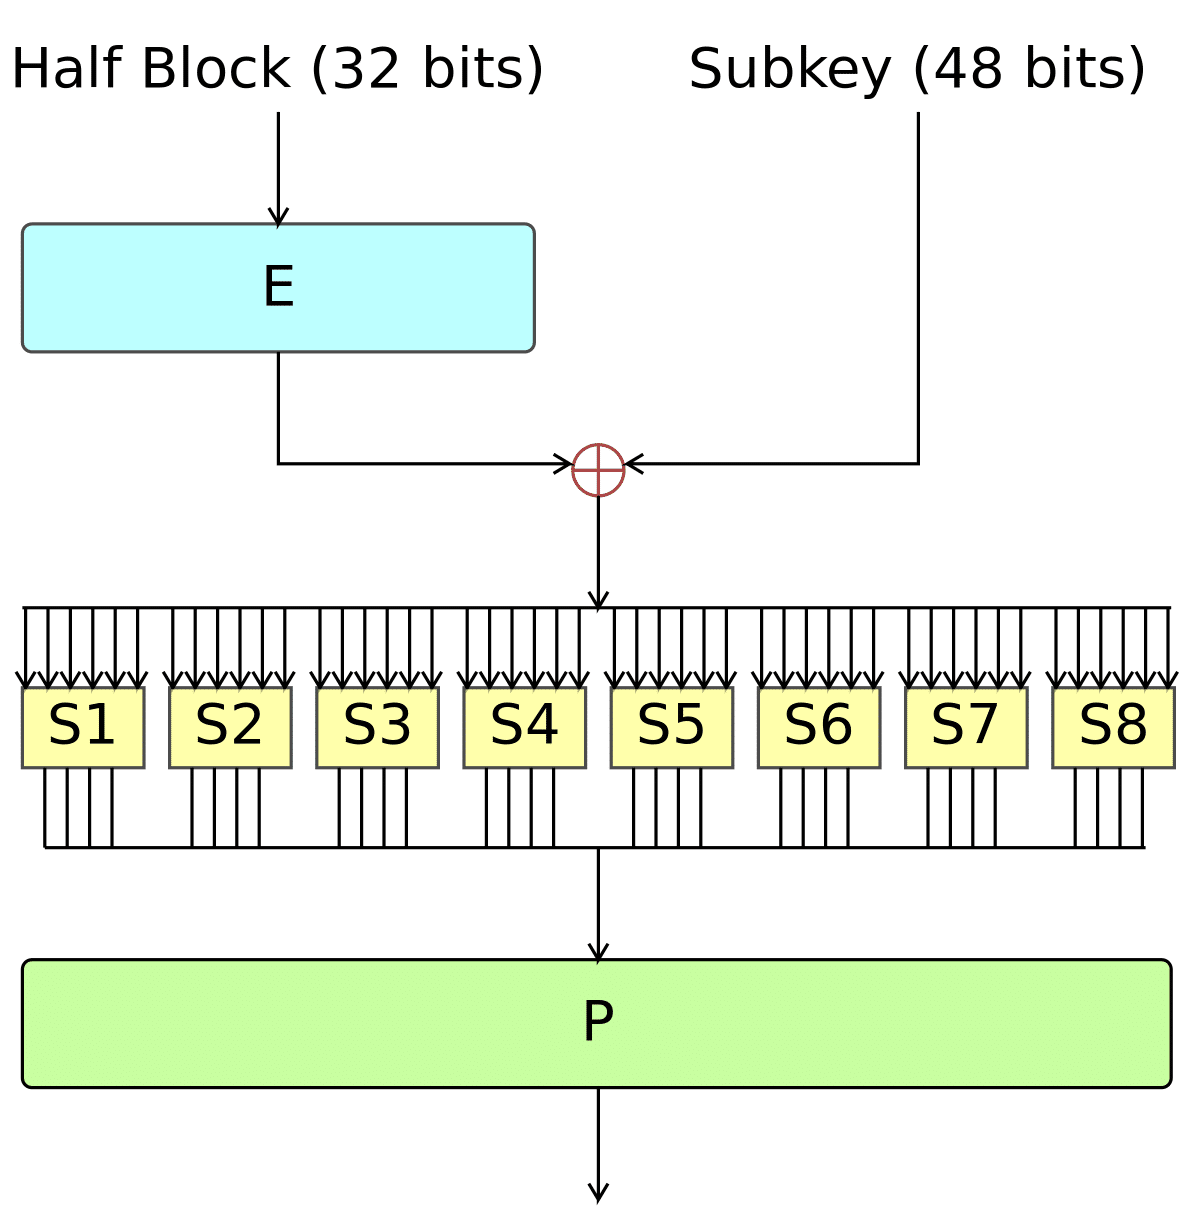 An image showing how DES encryption works